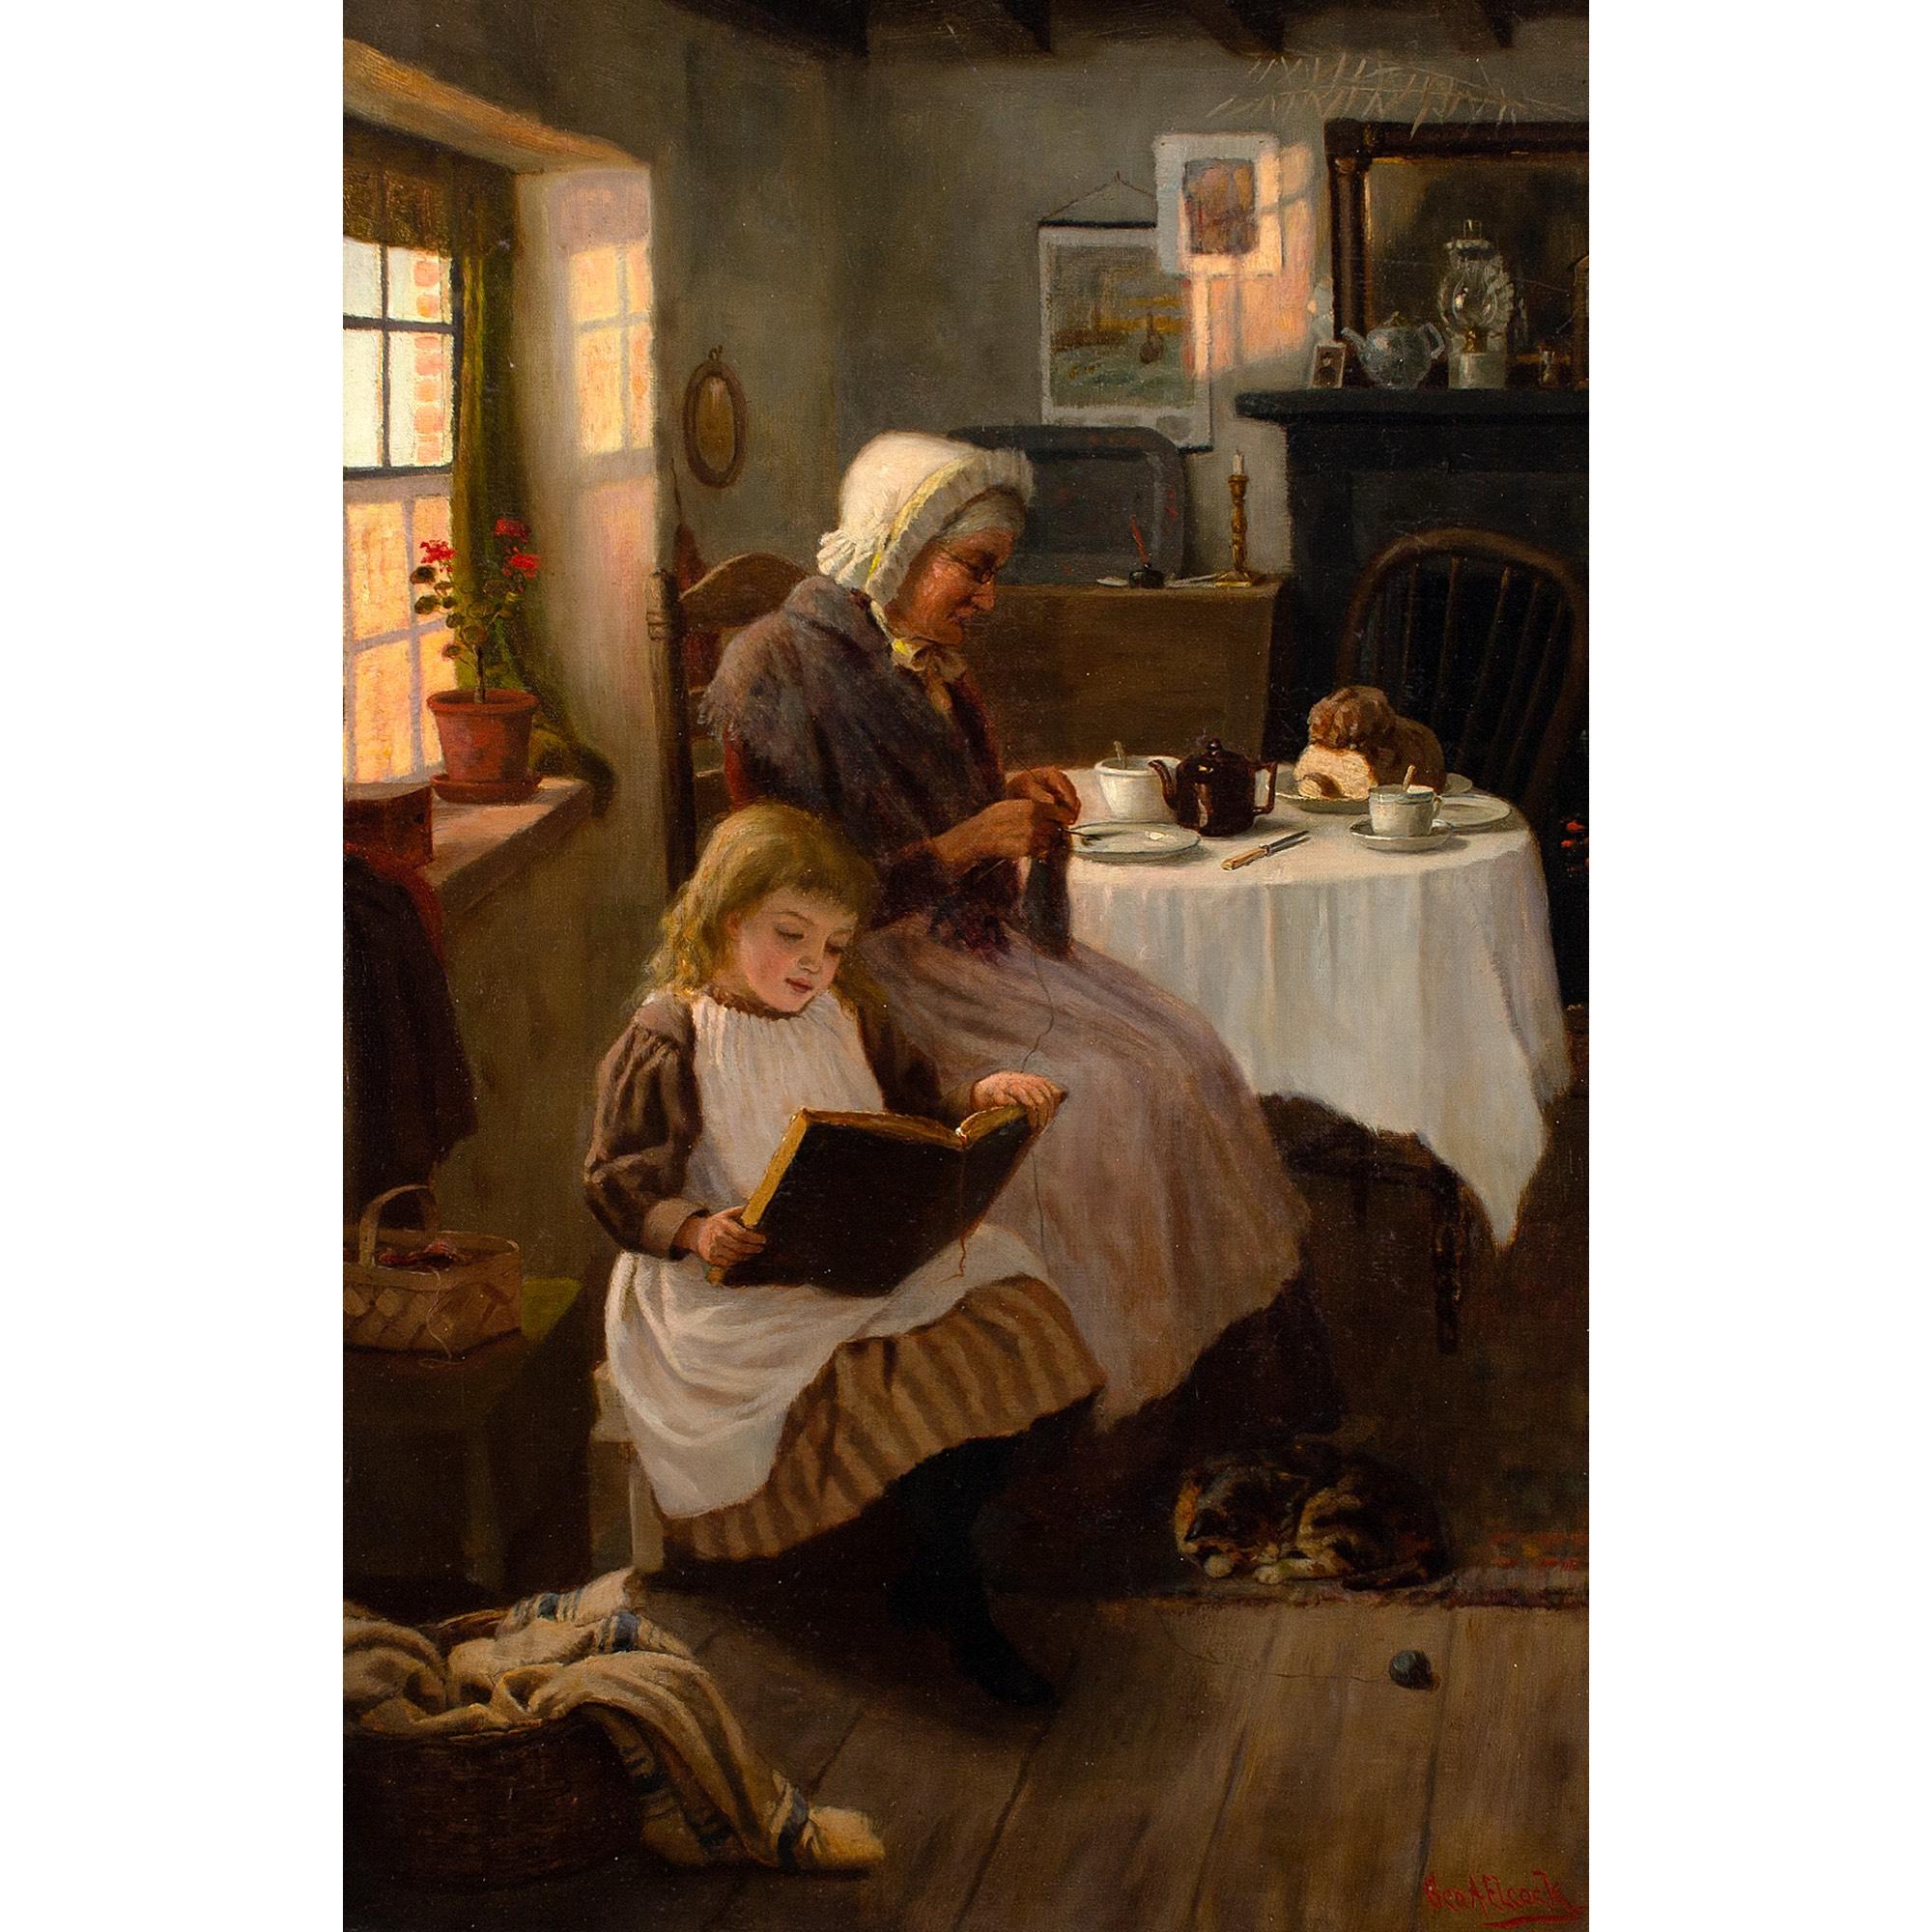 This fine late 19th-century oil painting by British artist George A Elcock (1856-1946) depicts a gentle interior scene with a young girl reading to her grandmother.

One gets the impression that this is a regular occurrence within the walls of this